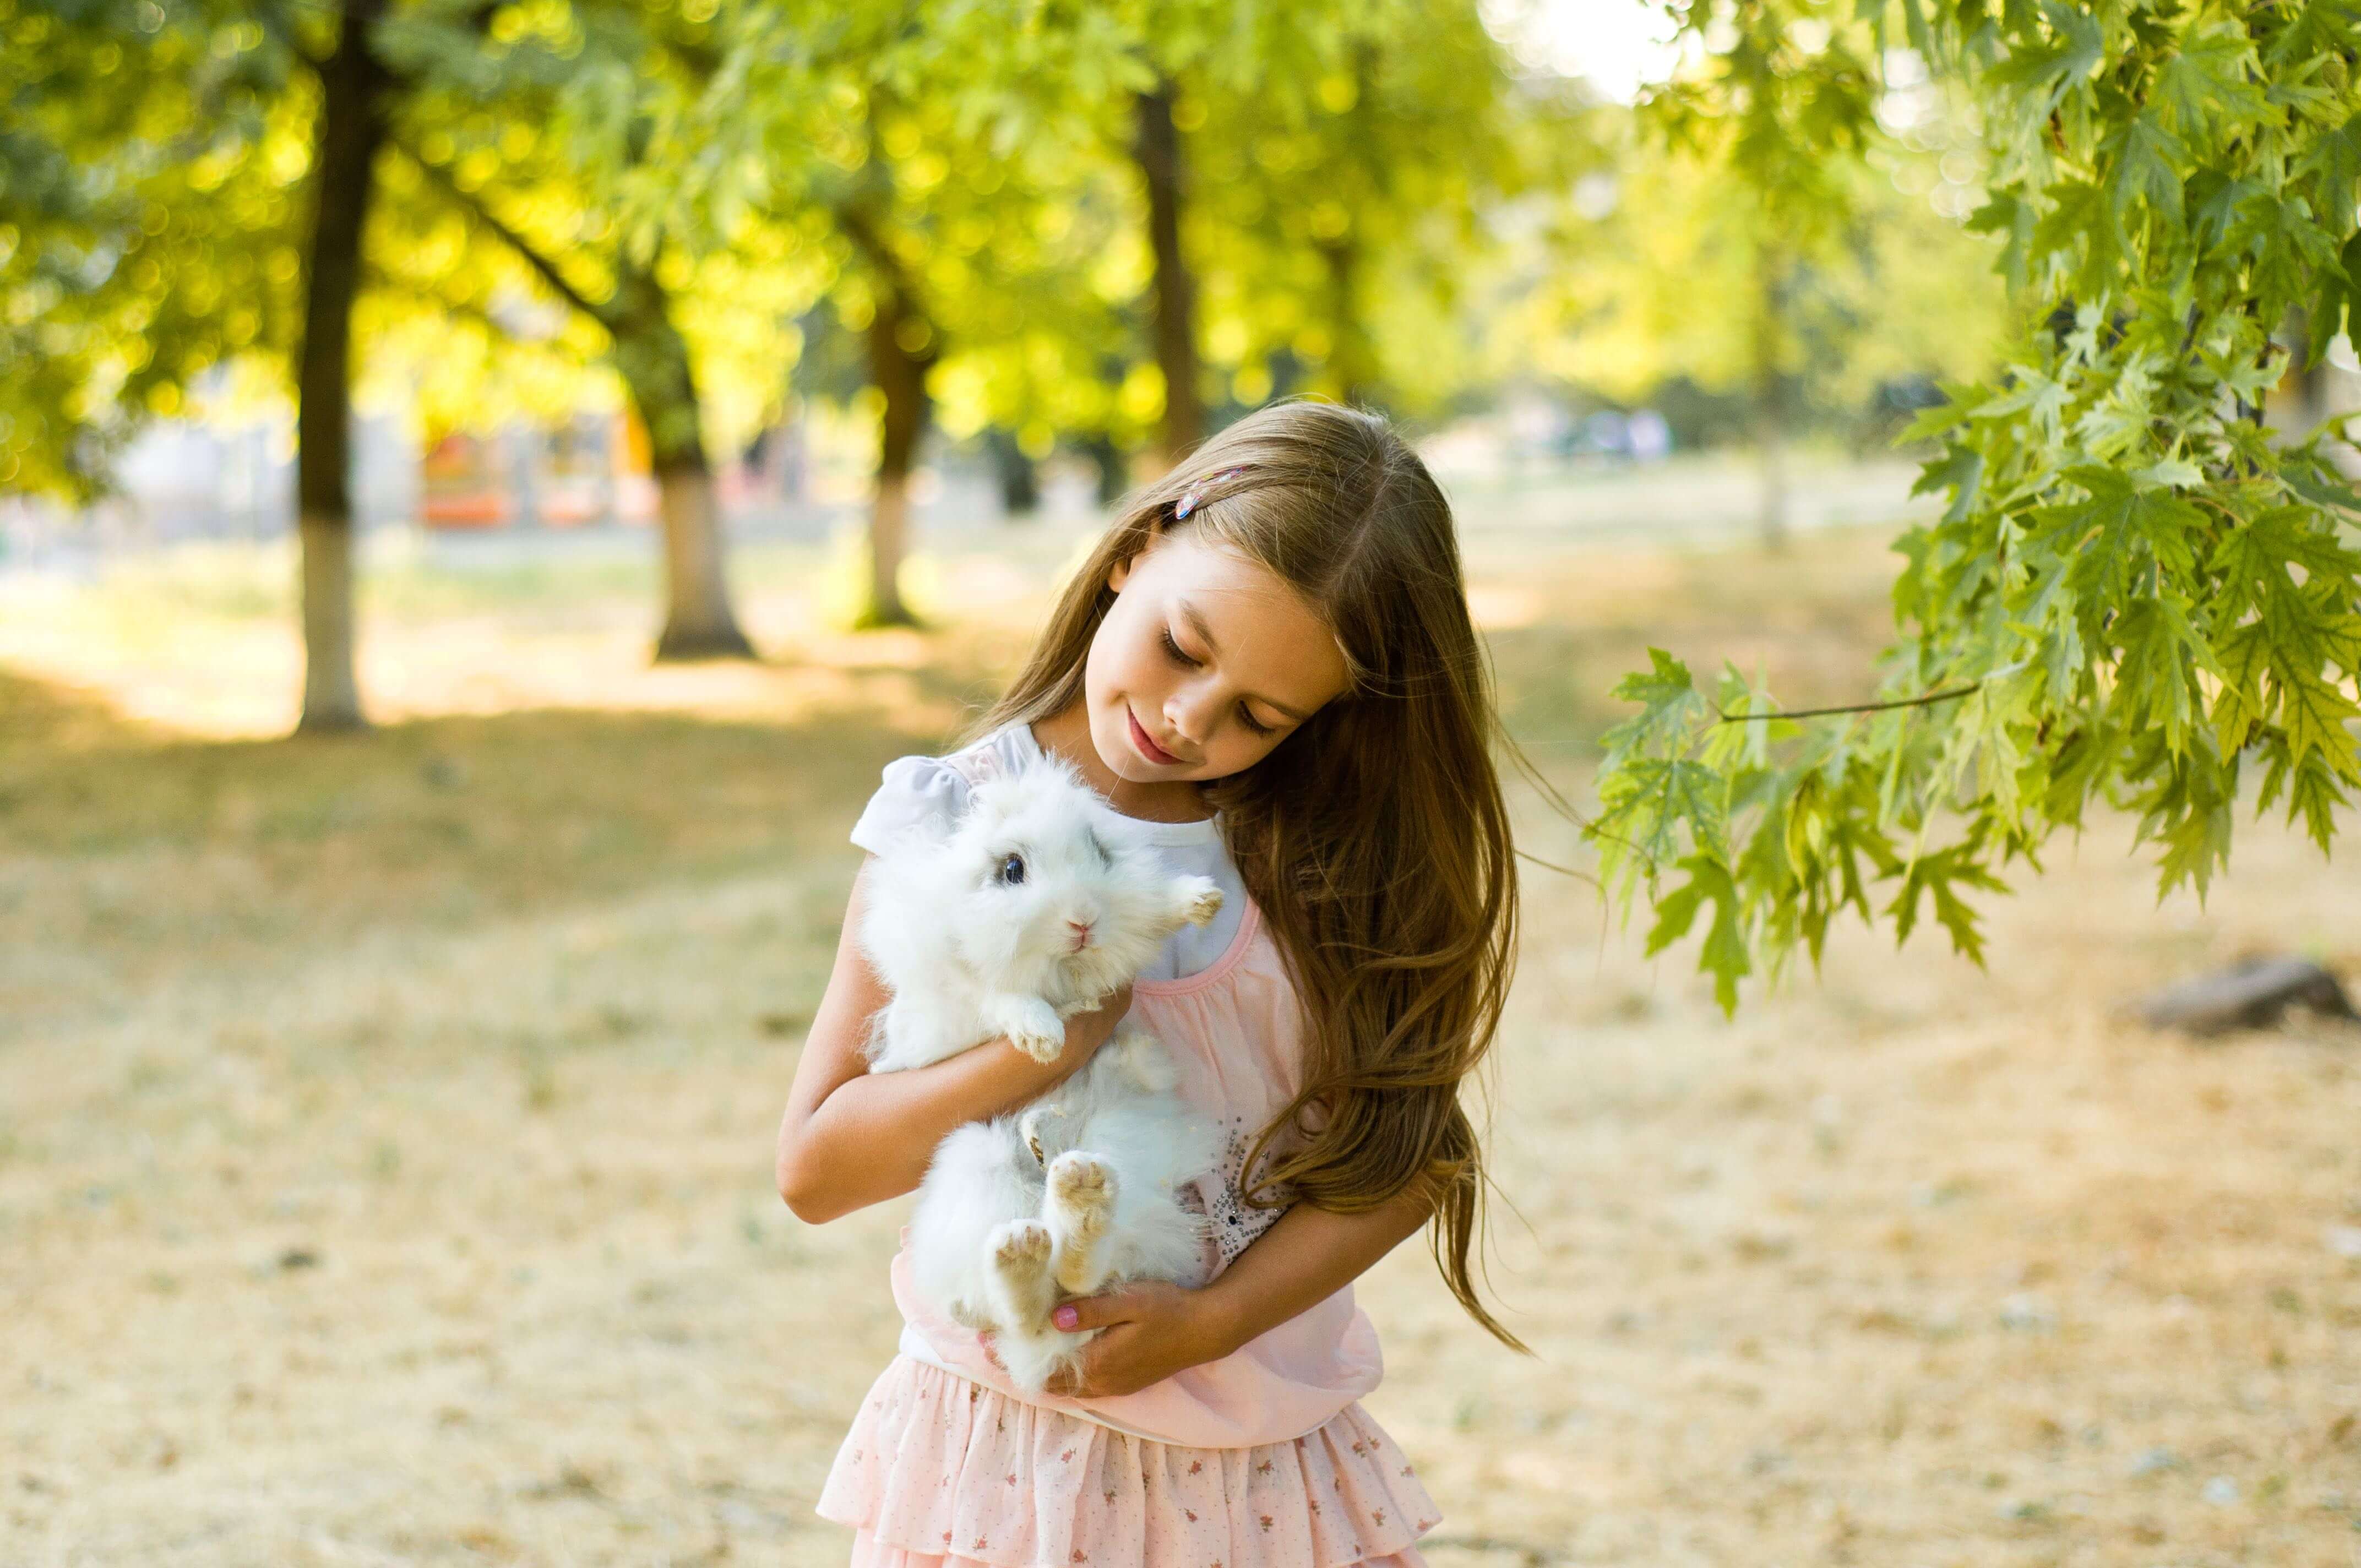 A girl holds a rabbit while walking outside.